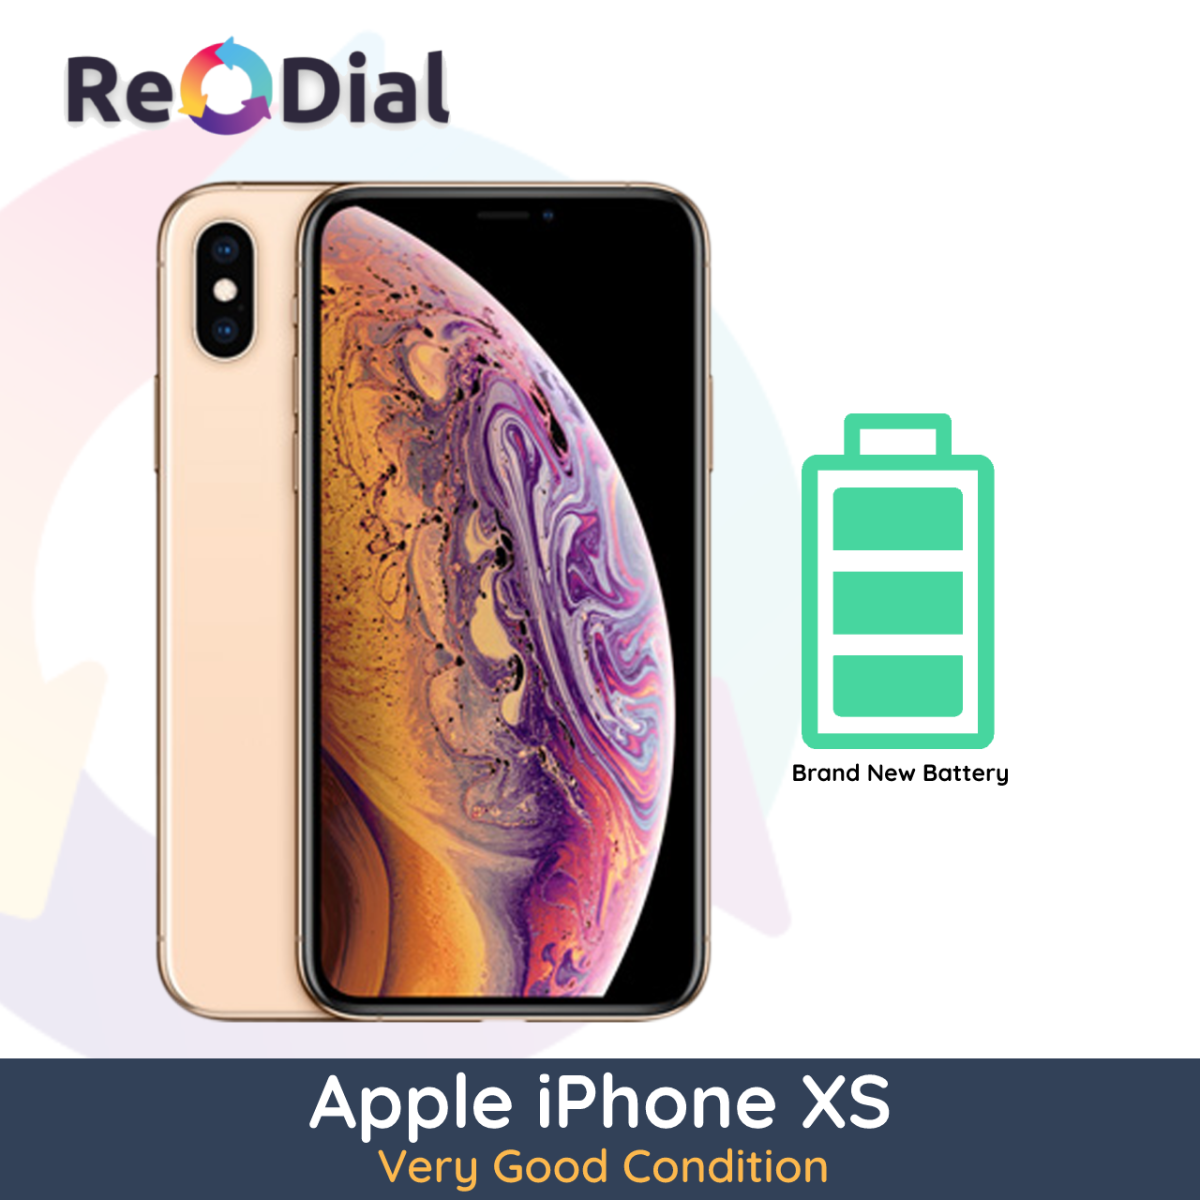 Apple iPhone Xs - Very Good Condition (New Apple Original Battery)